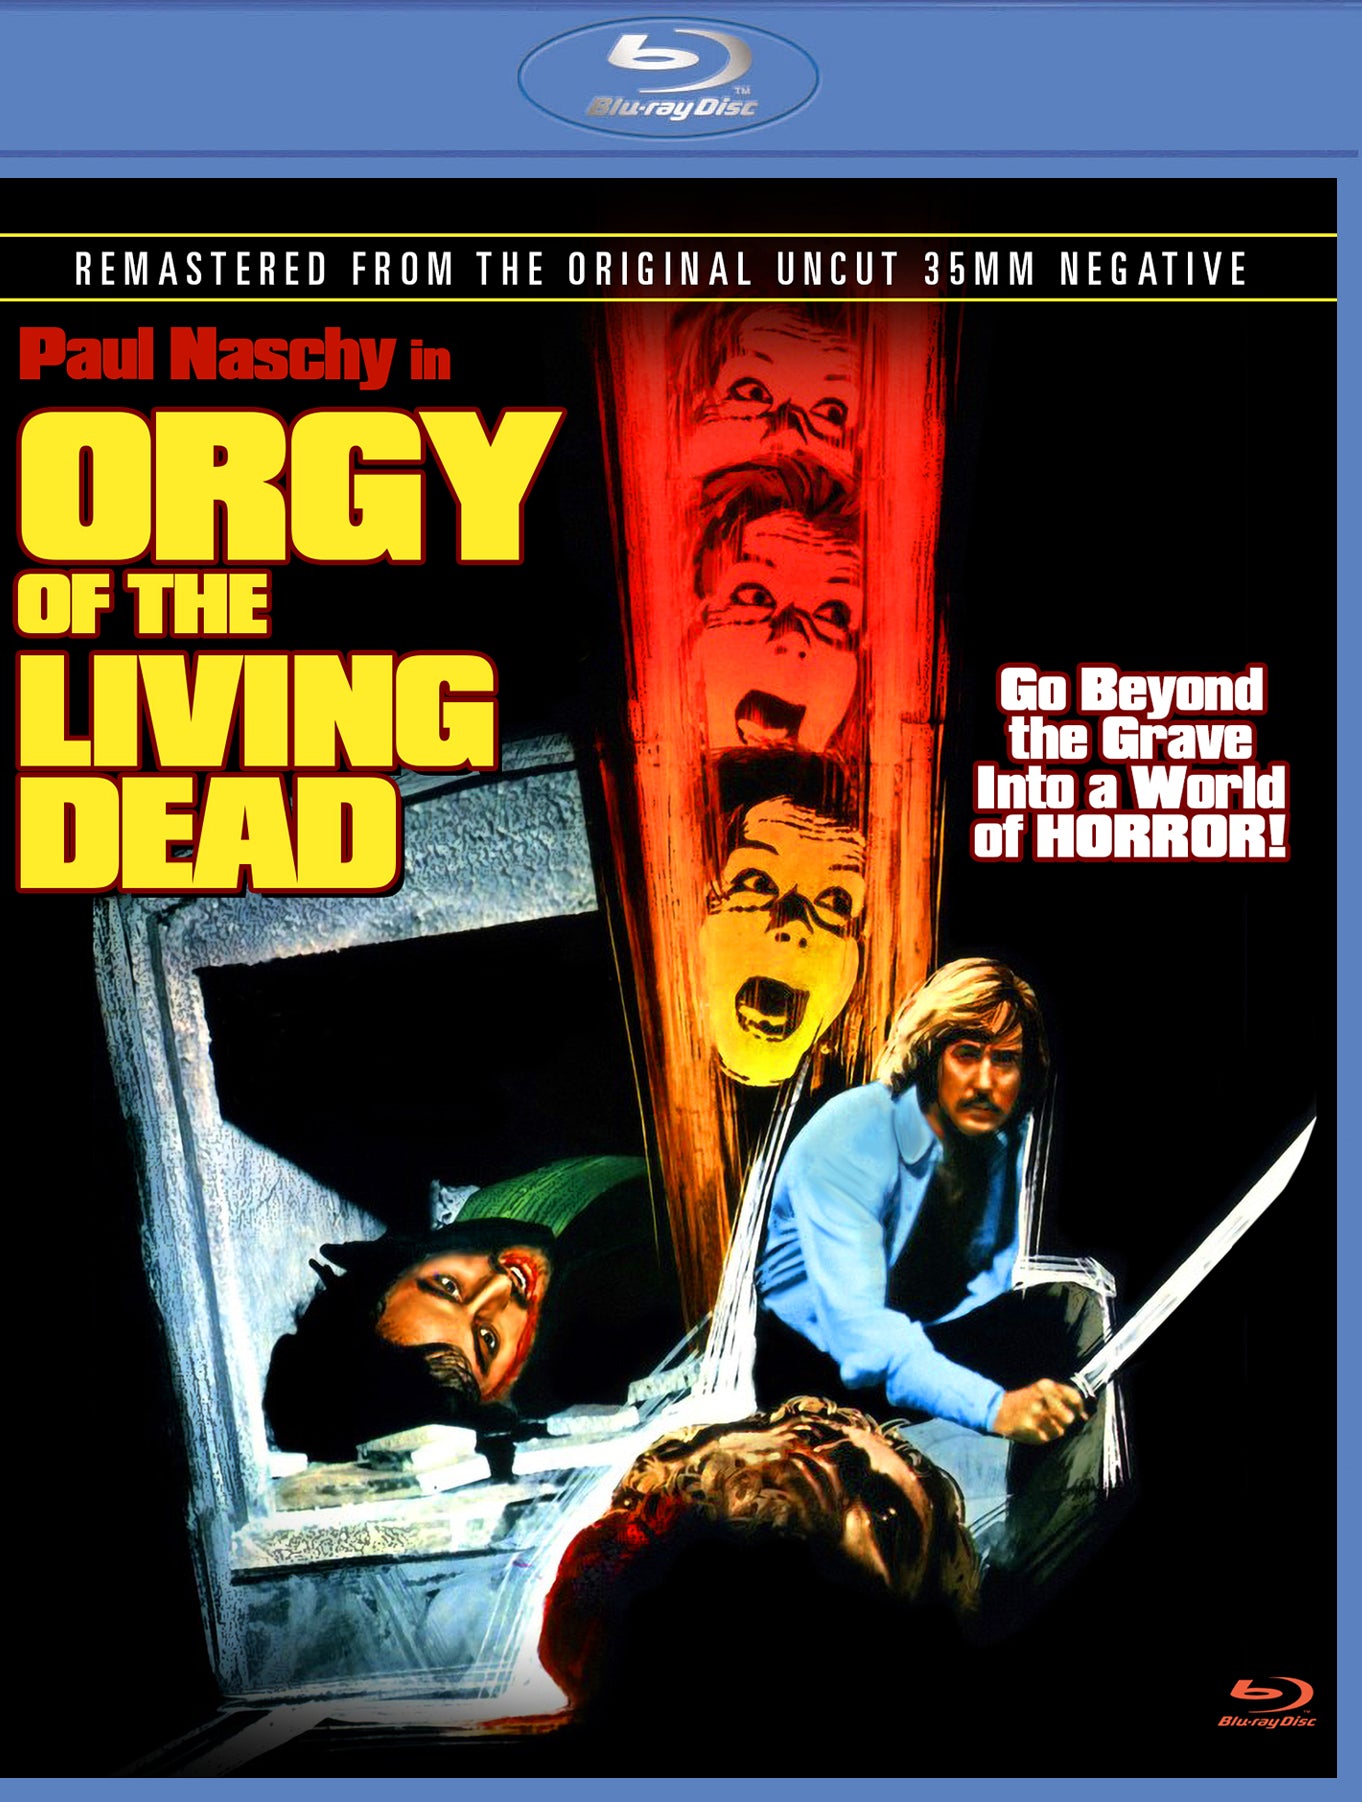 Orgy of the Living Dead [Blu-ray] cover art